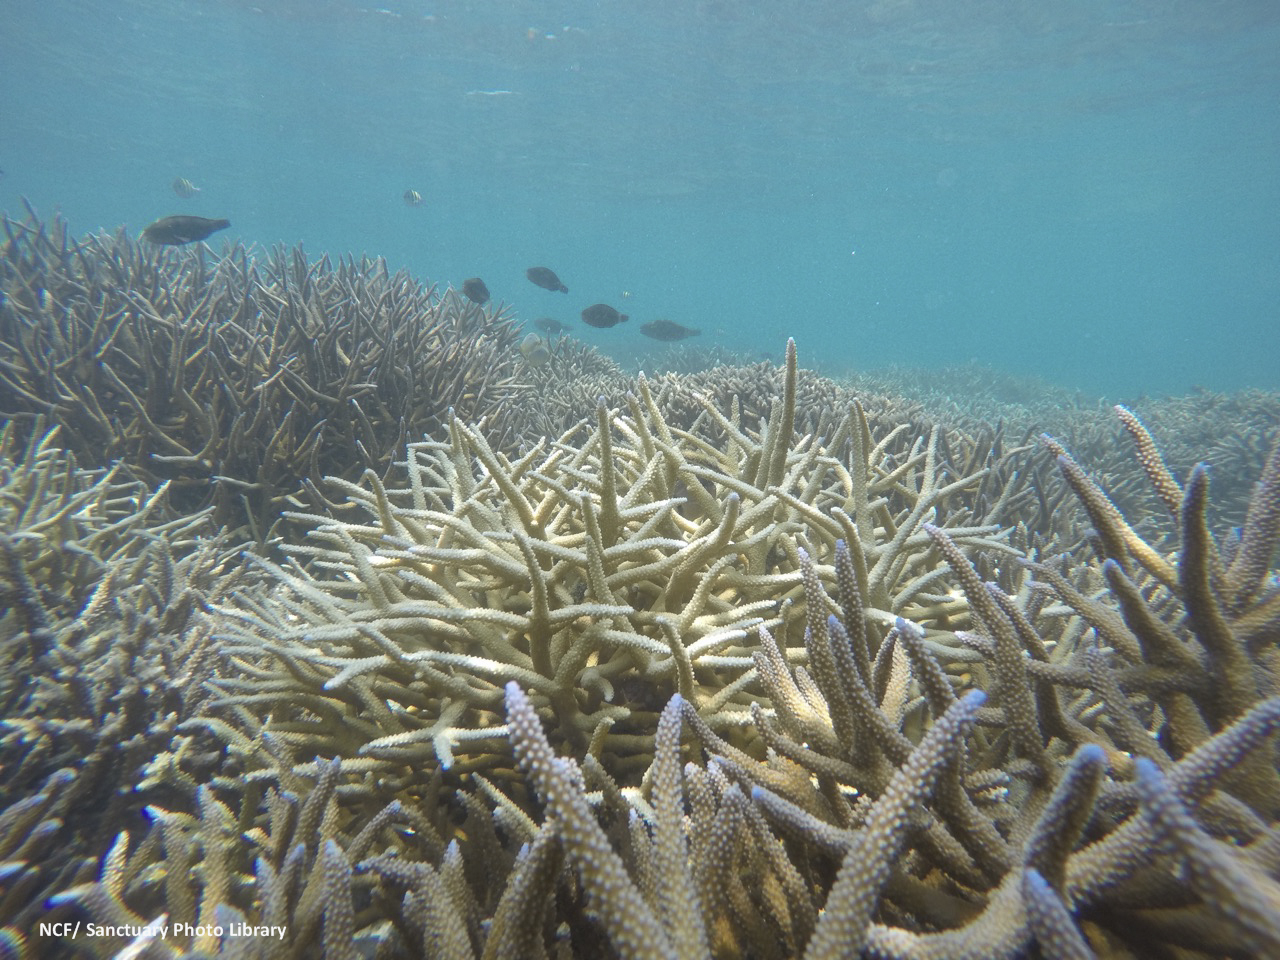 The record-breaking surface temperatures turn shallow reefs ghostly pale as they bleach. Photo courtesy of NCF.